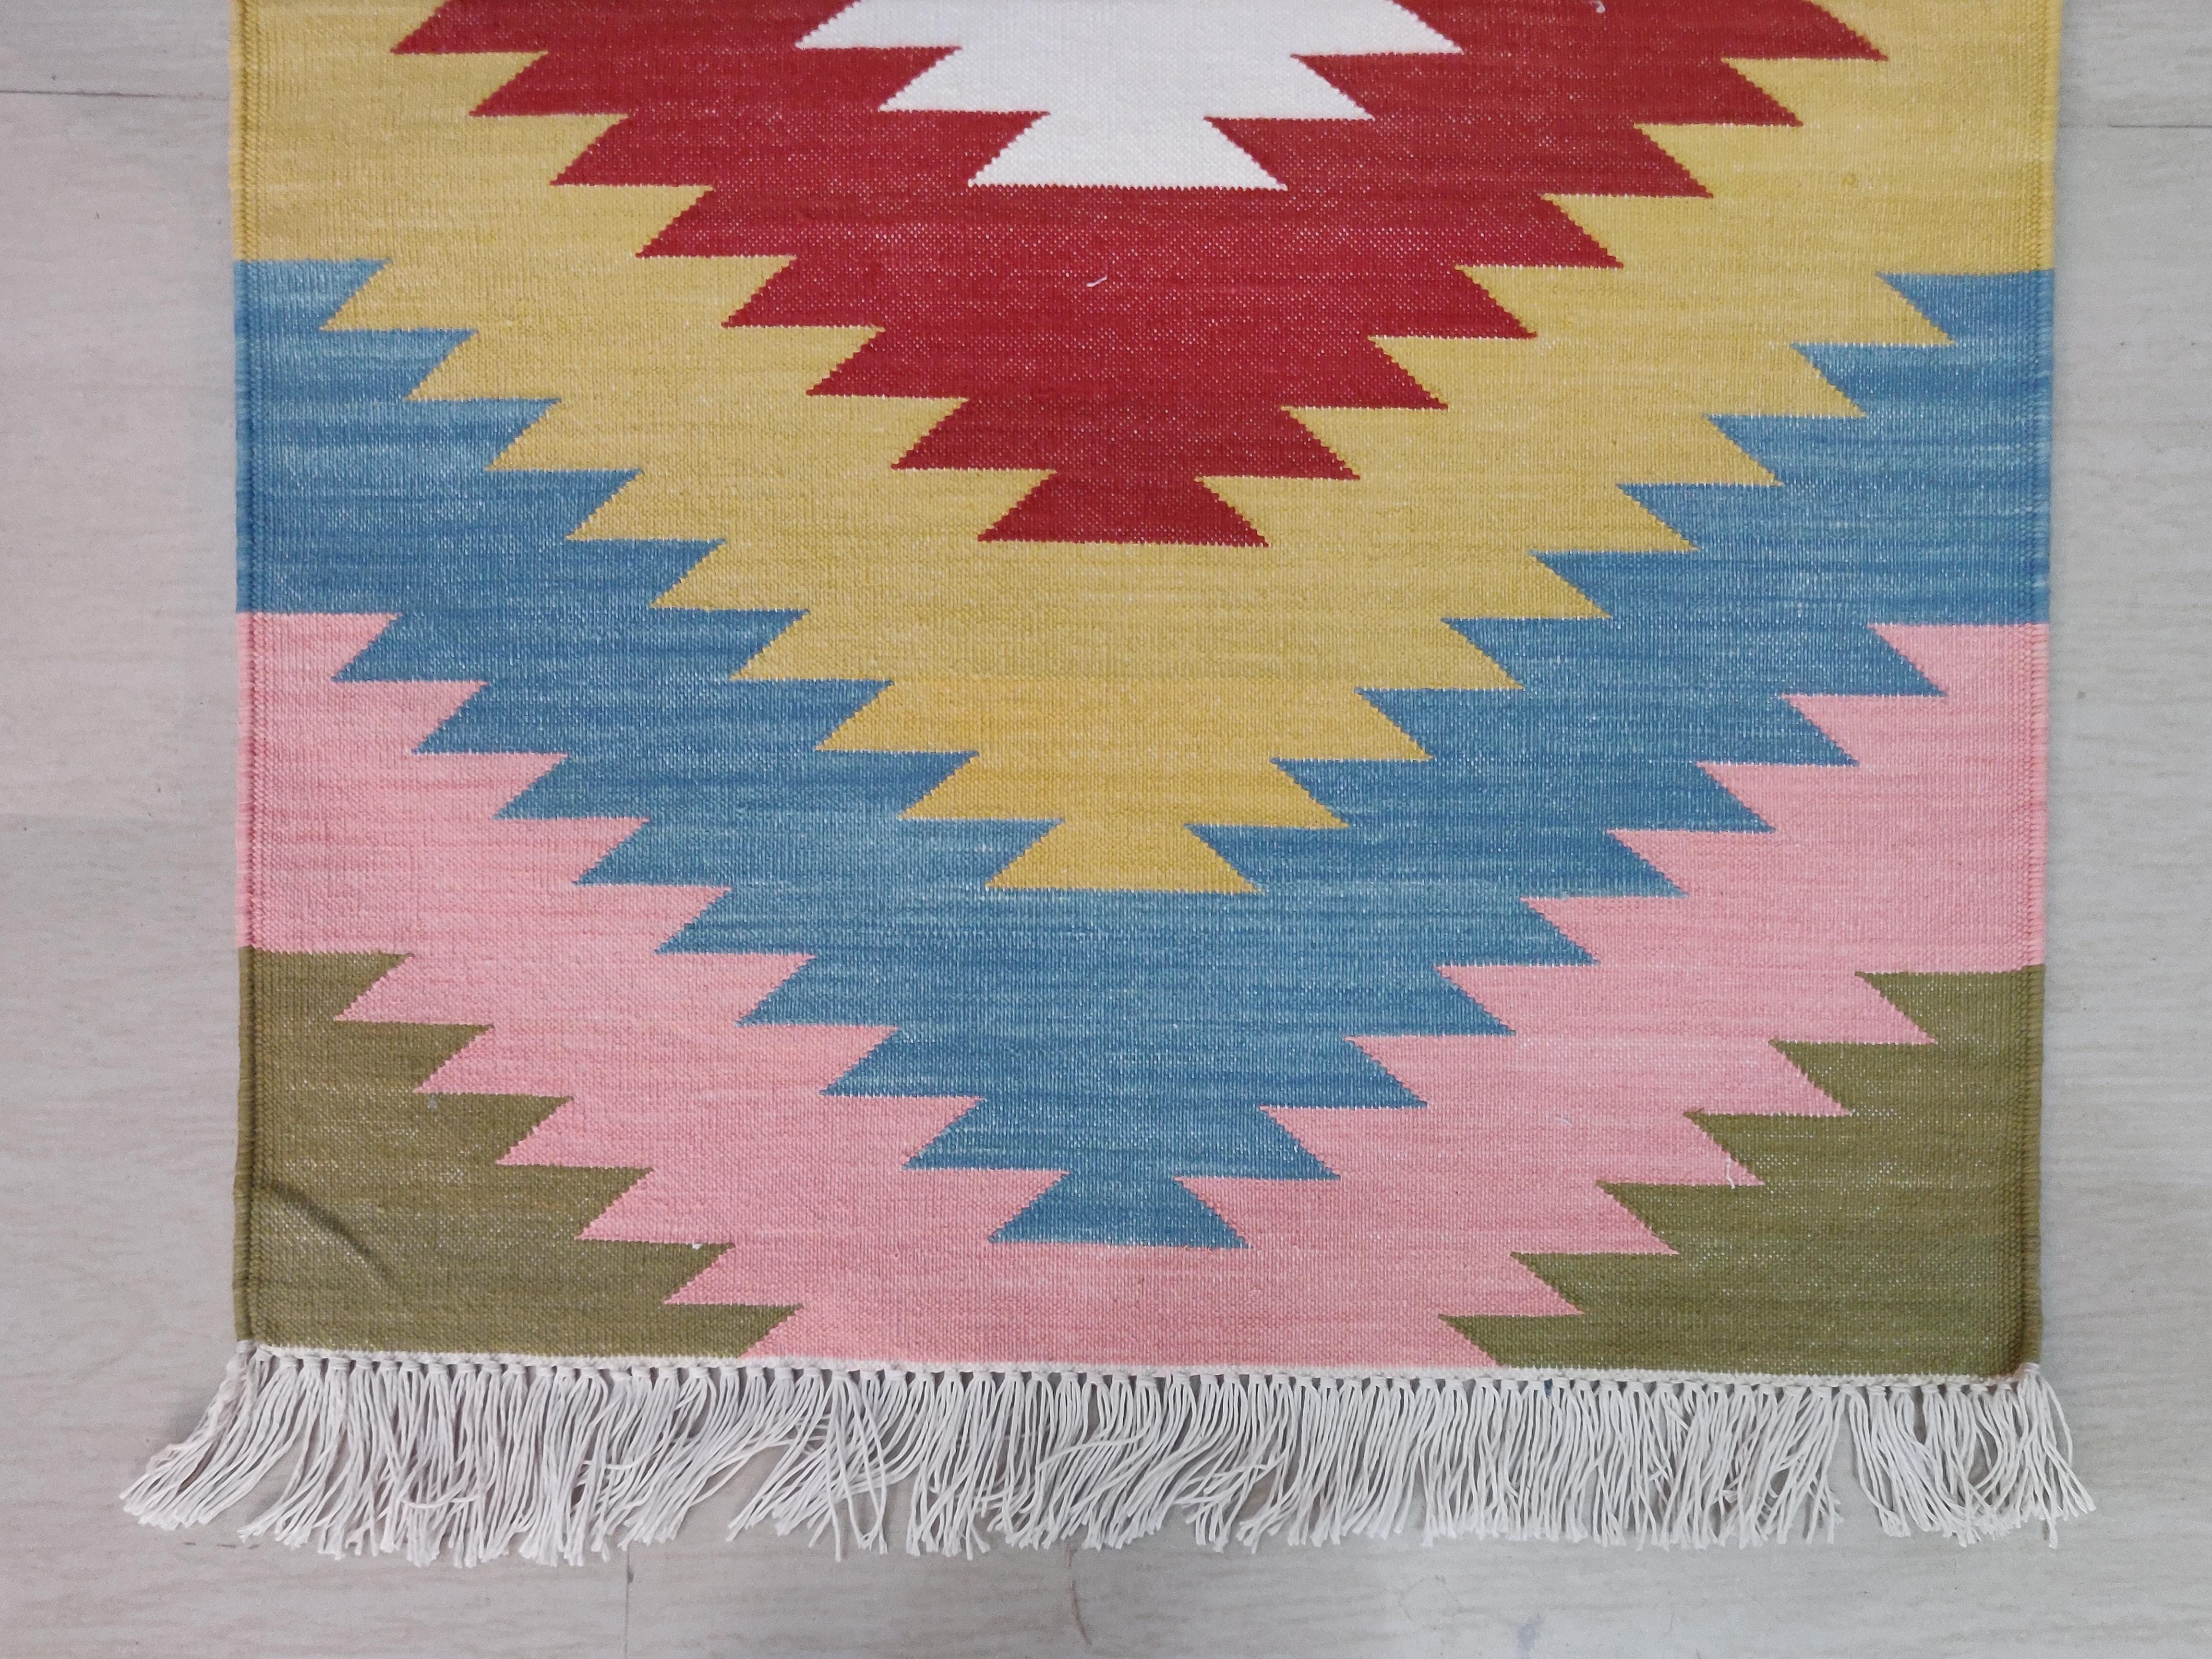 Hand-Woven Handmade Cotton Area Flat Weave Rug, 2x3 Red And Blue Geometric Indian Dhurrie For Sale